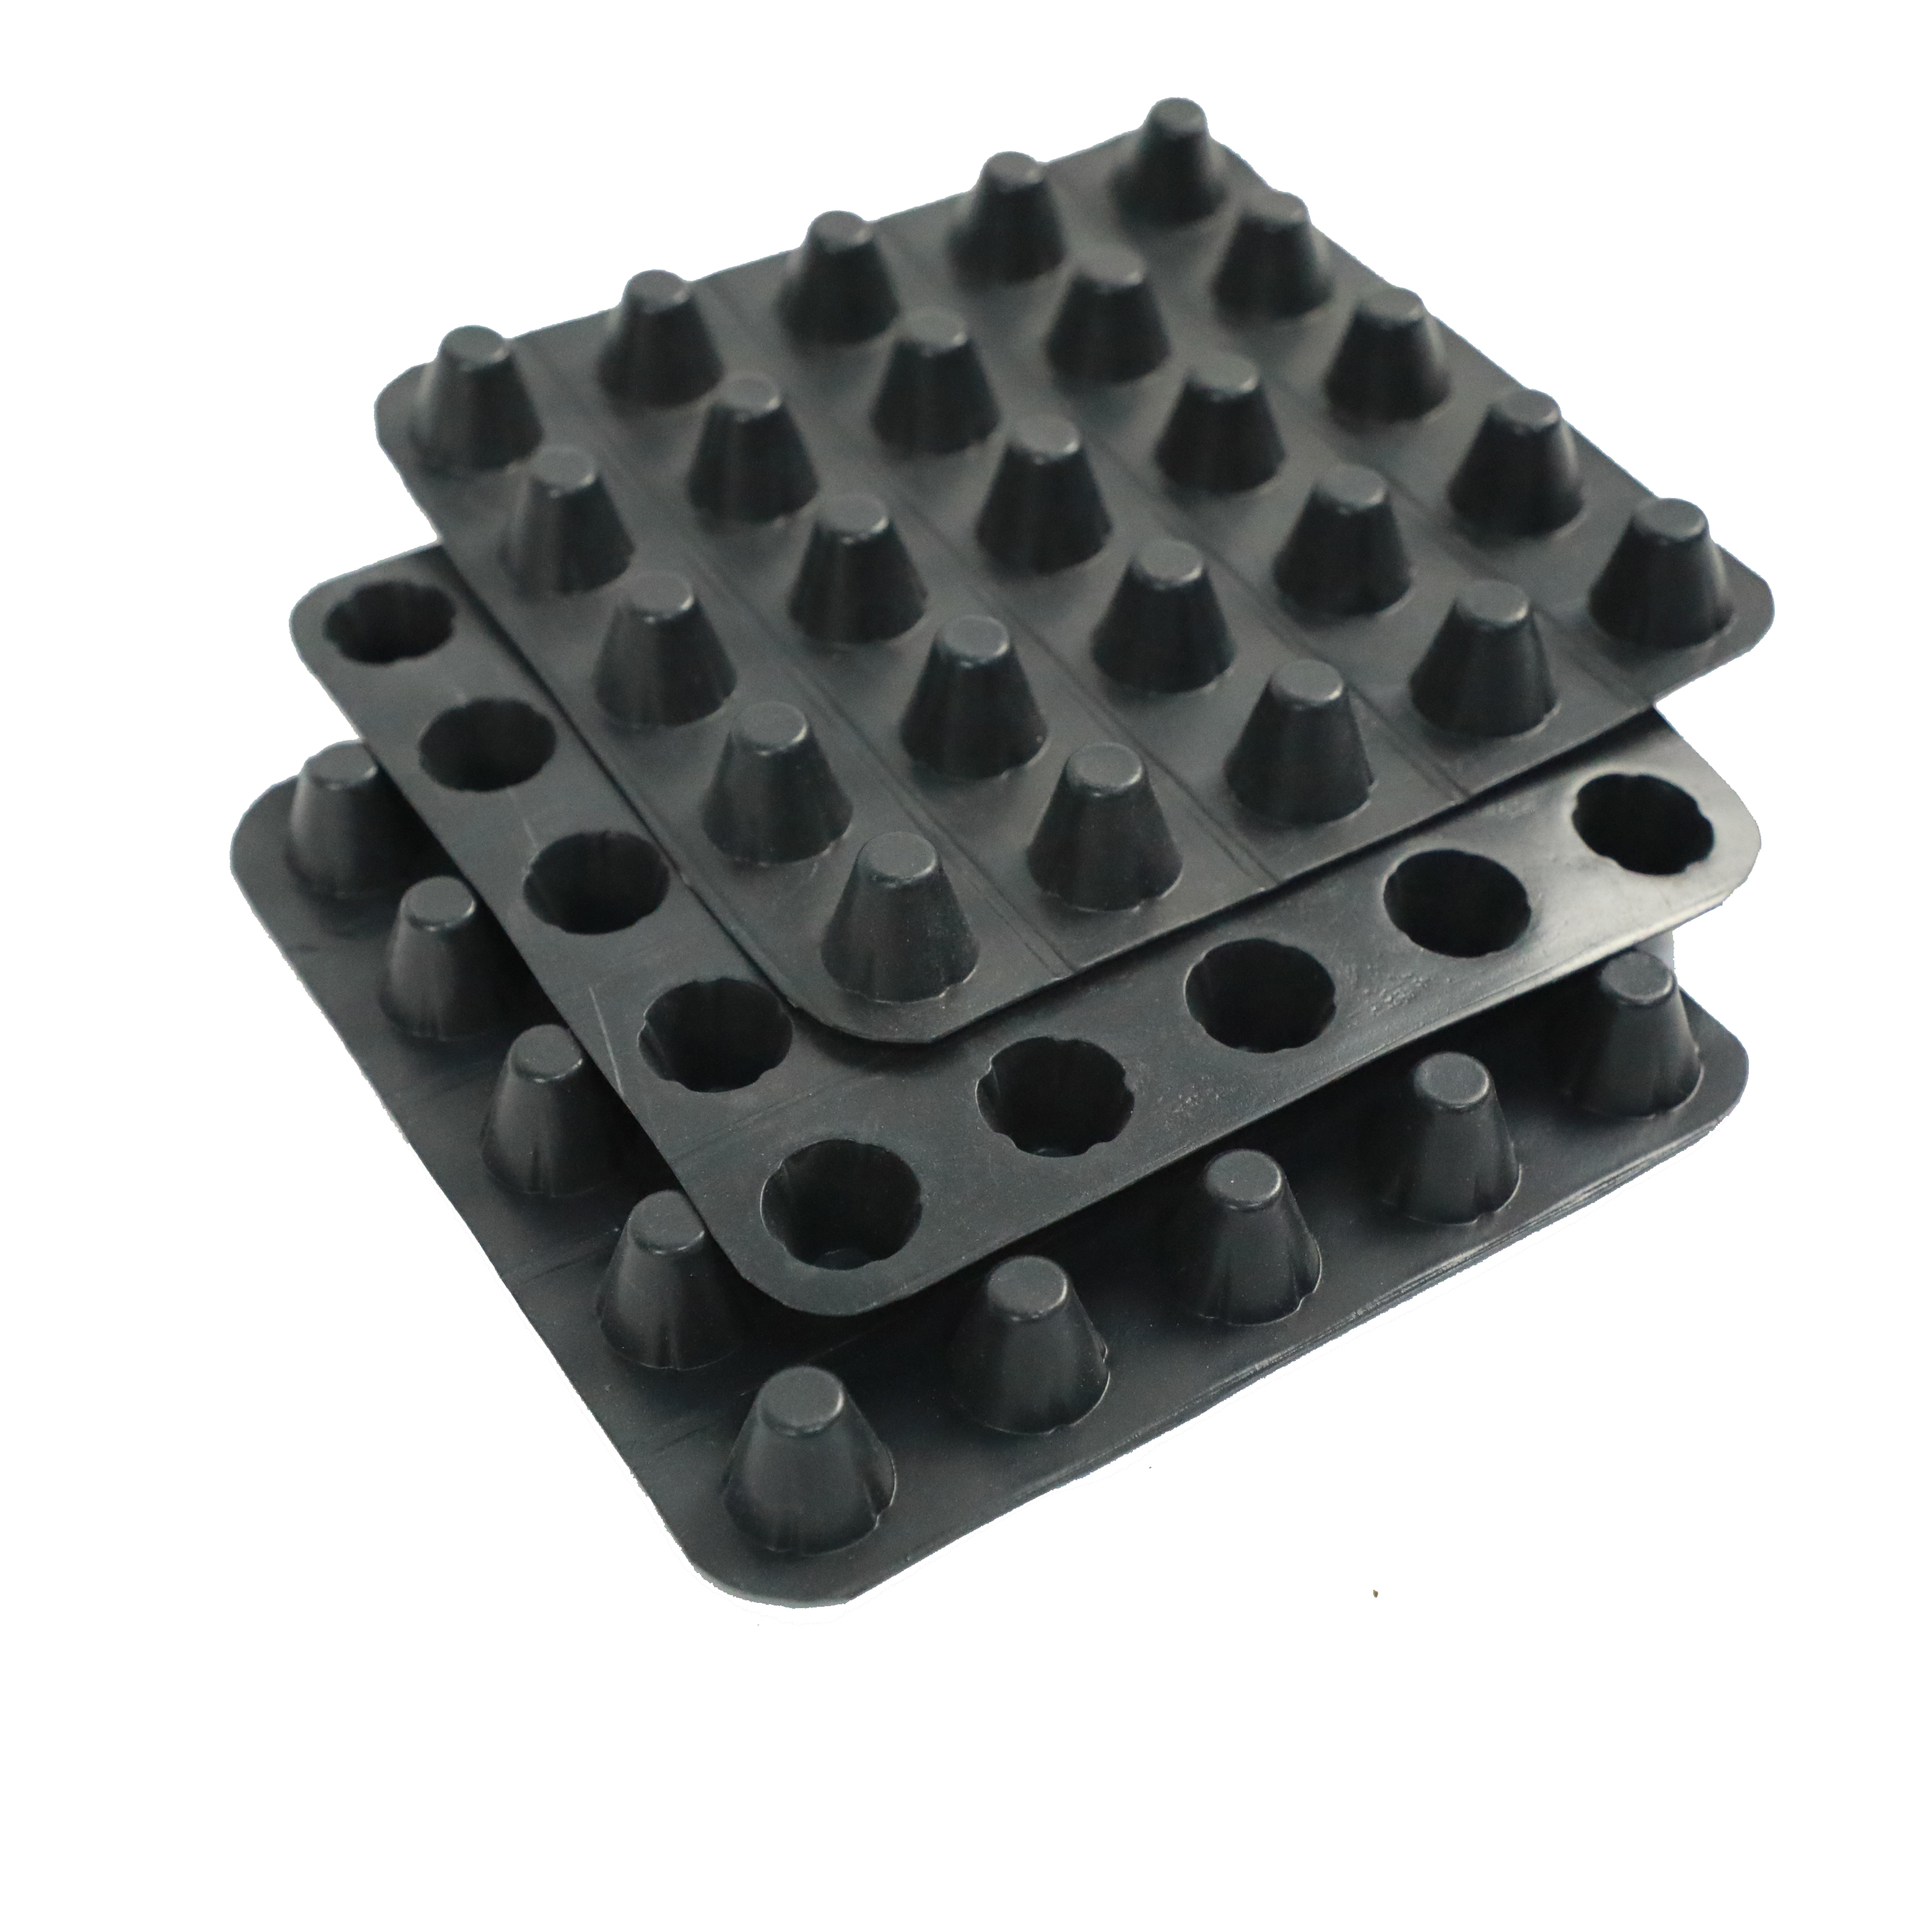  HDPE Dimple Plastic Drainage Board for Roof Garden